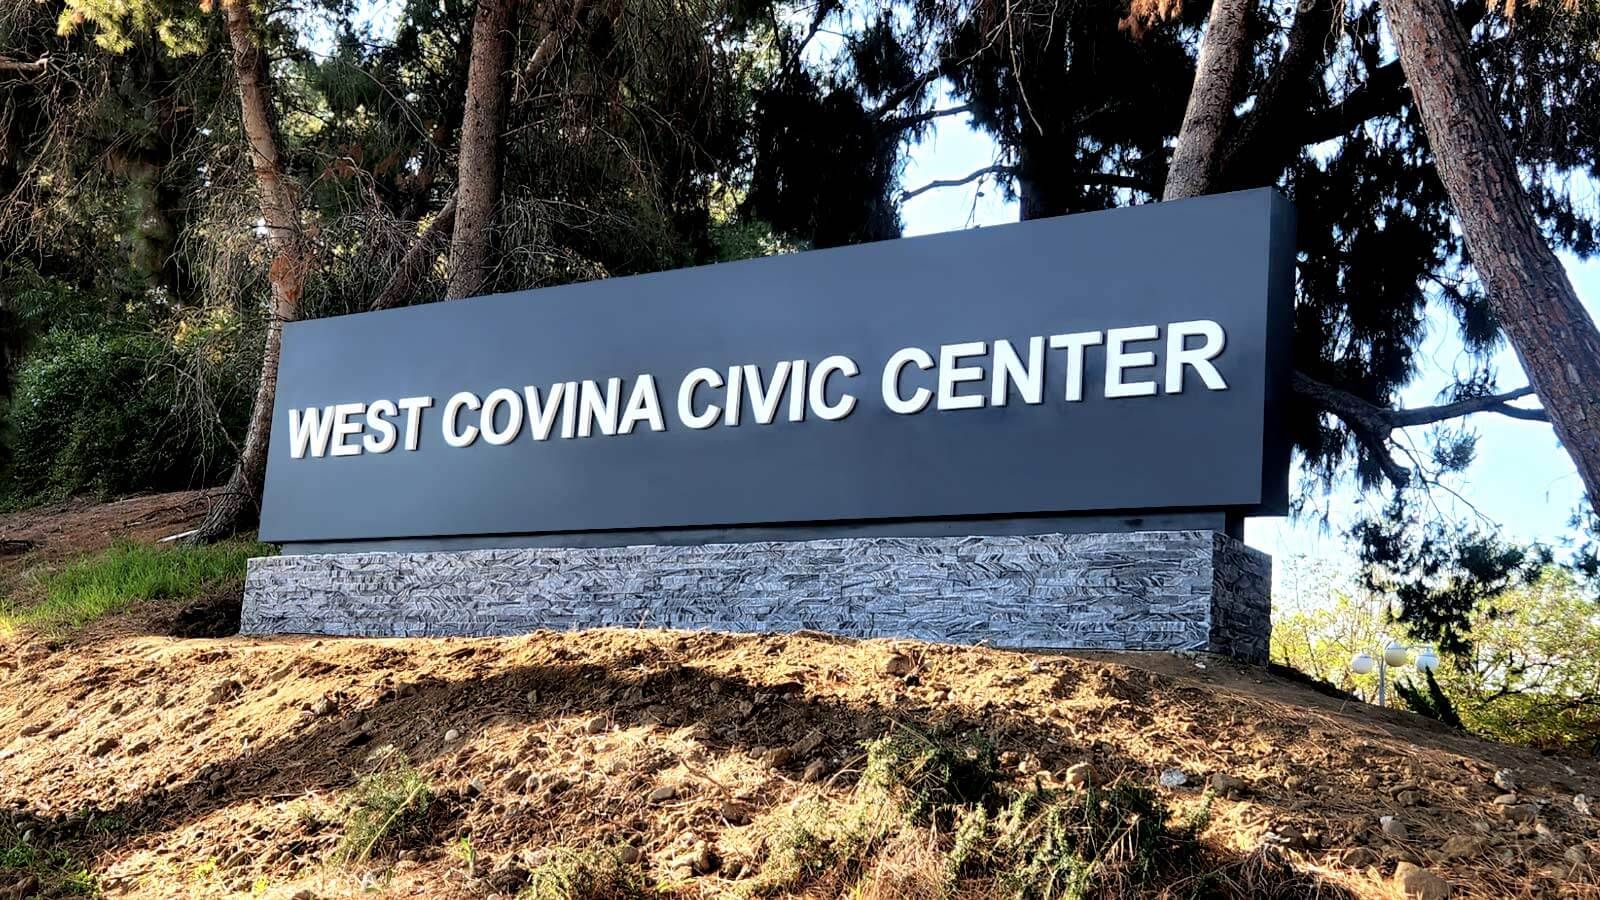 West Covina Civic Center outdoor monument sign